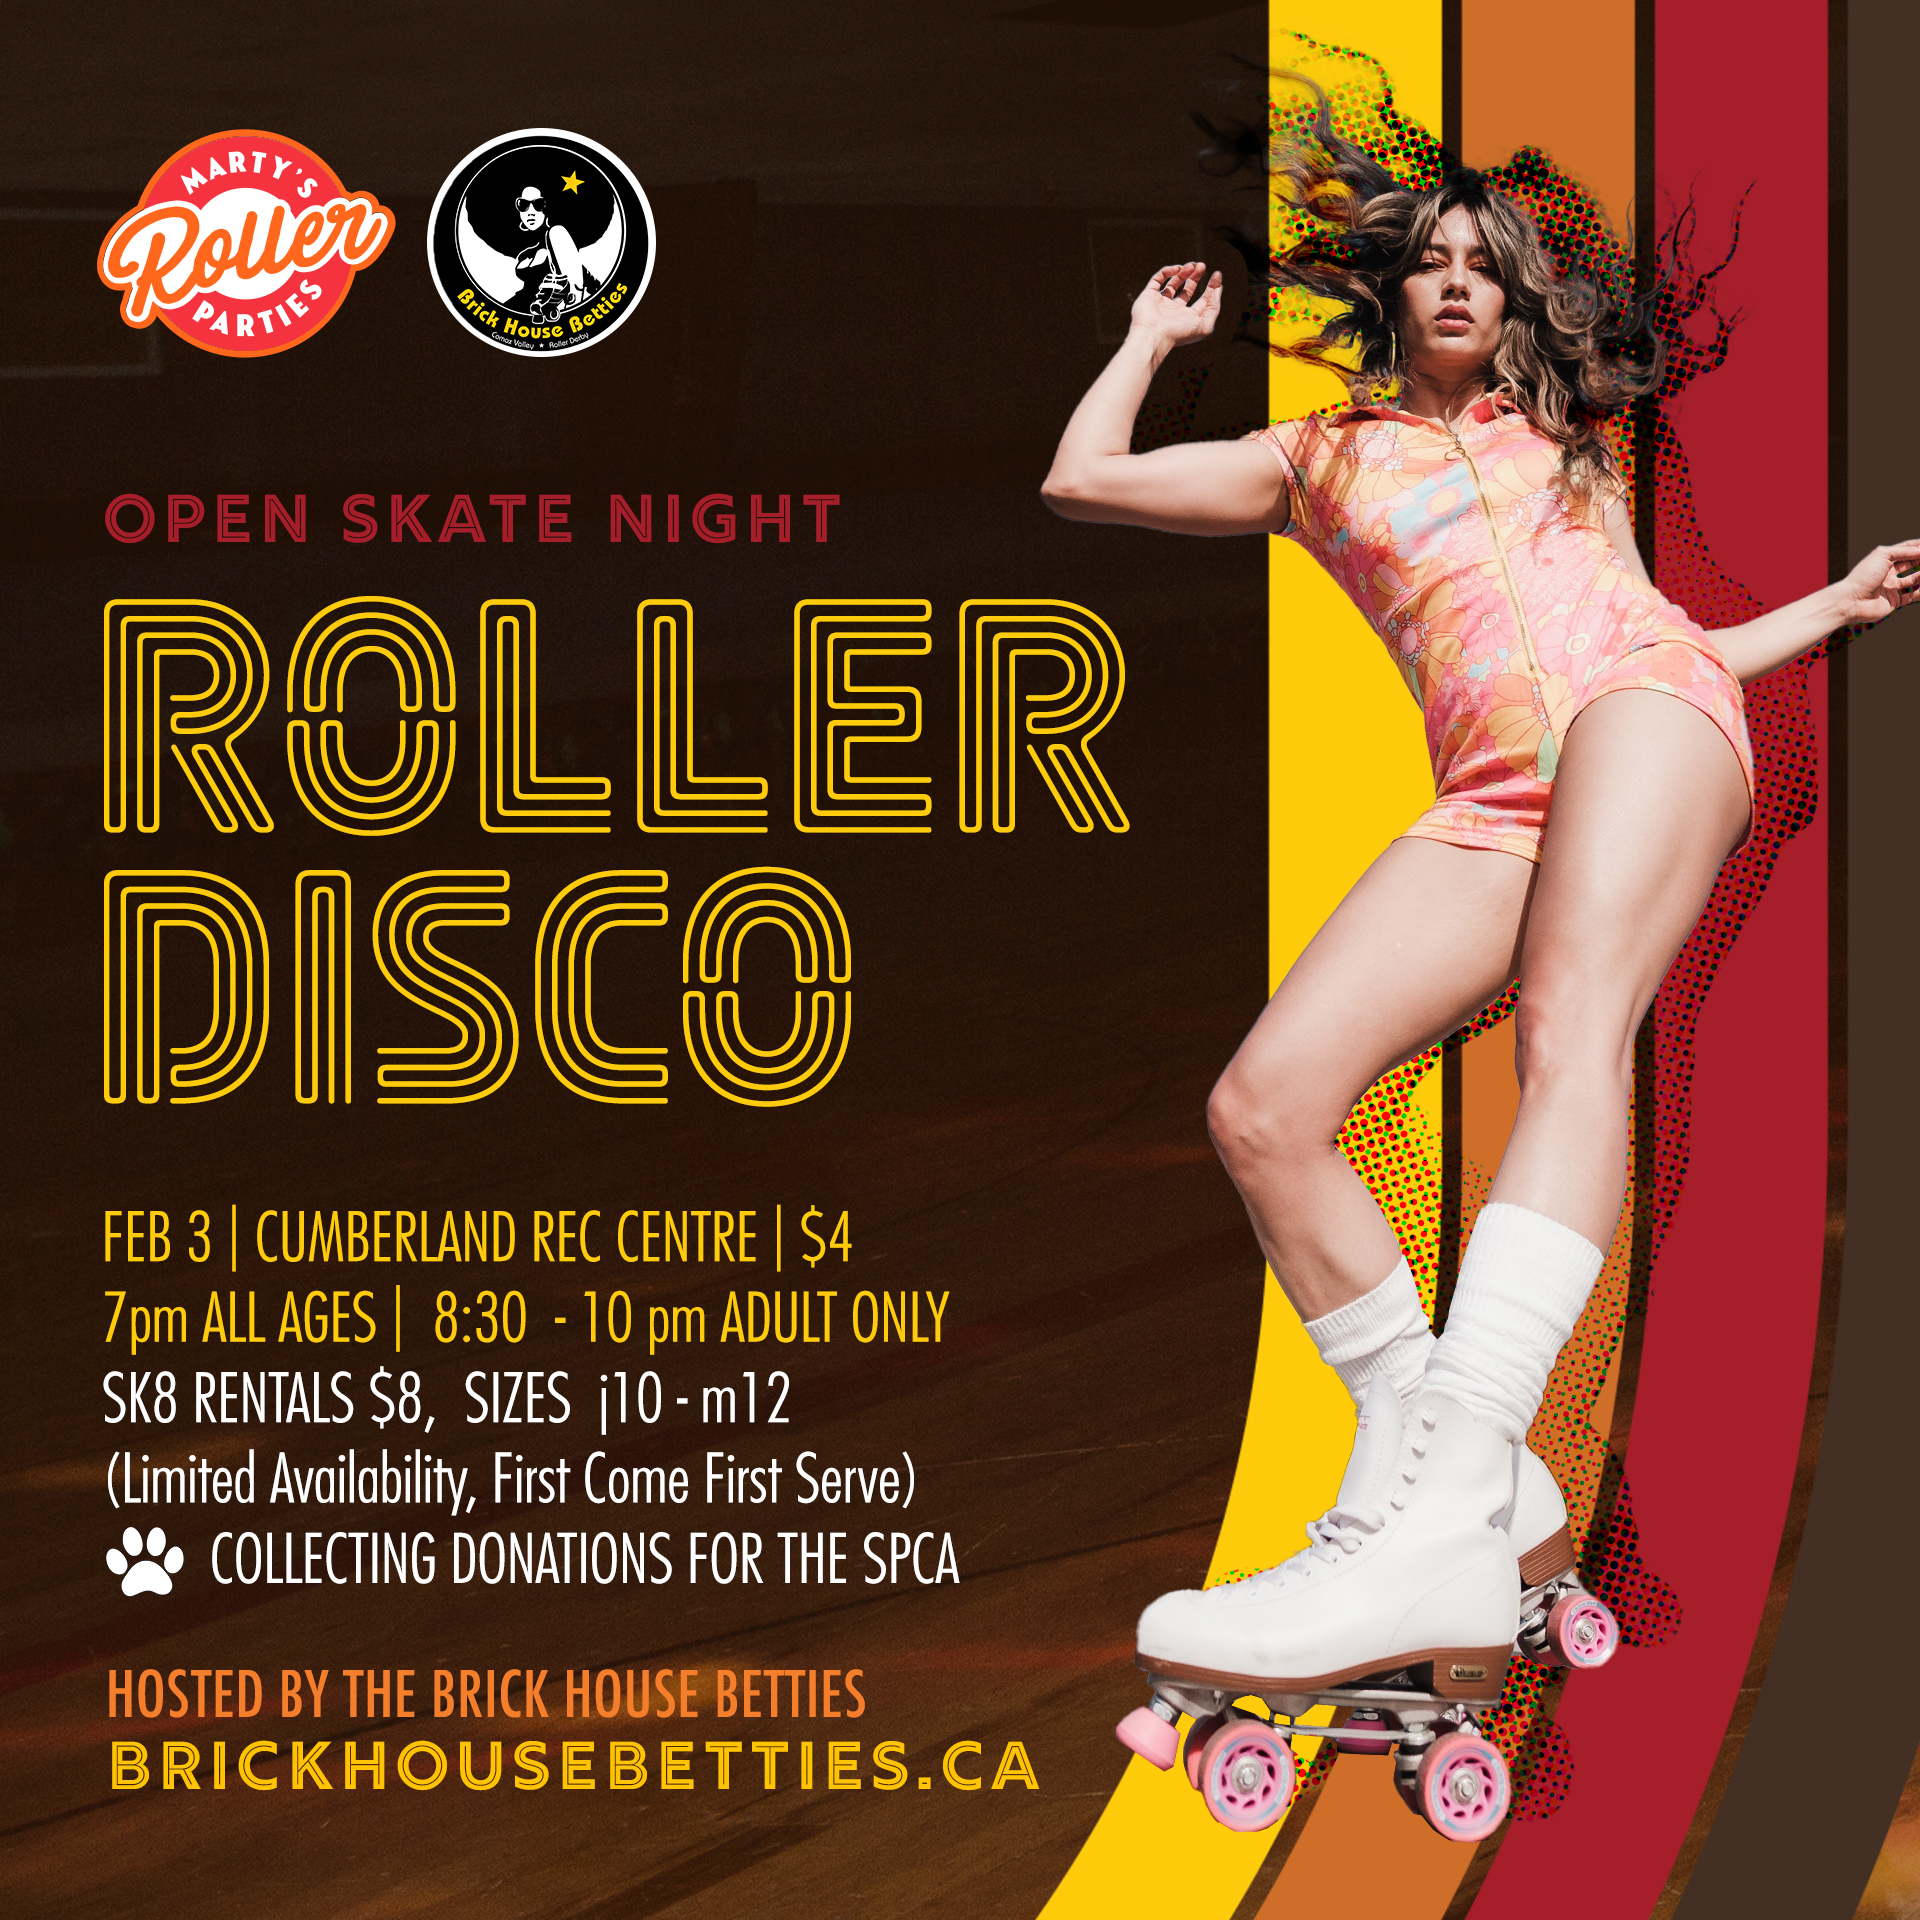 Learn to play Roller Derby and Roller Skate! Start your new year with new skills!